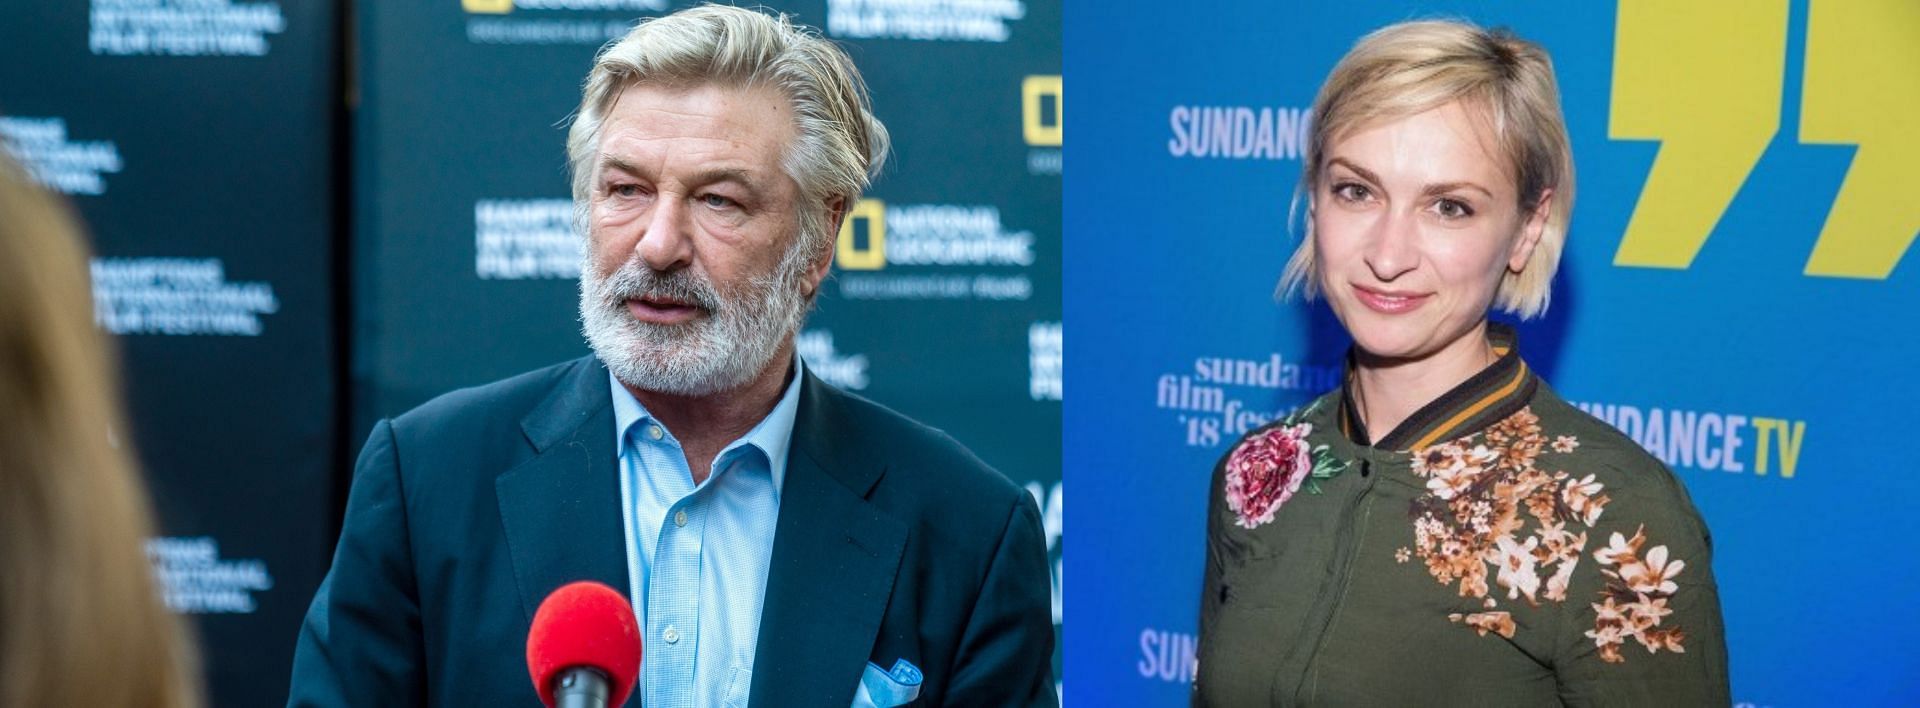 Alec Baldwin and Halyna Hutchins (Image via Mark Sagliocco /Getty Images, and Mat Hayward /Getty Images)